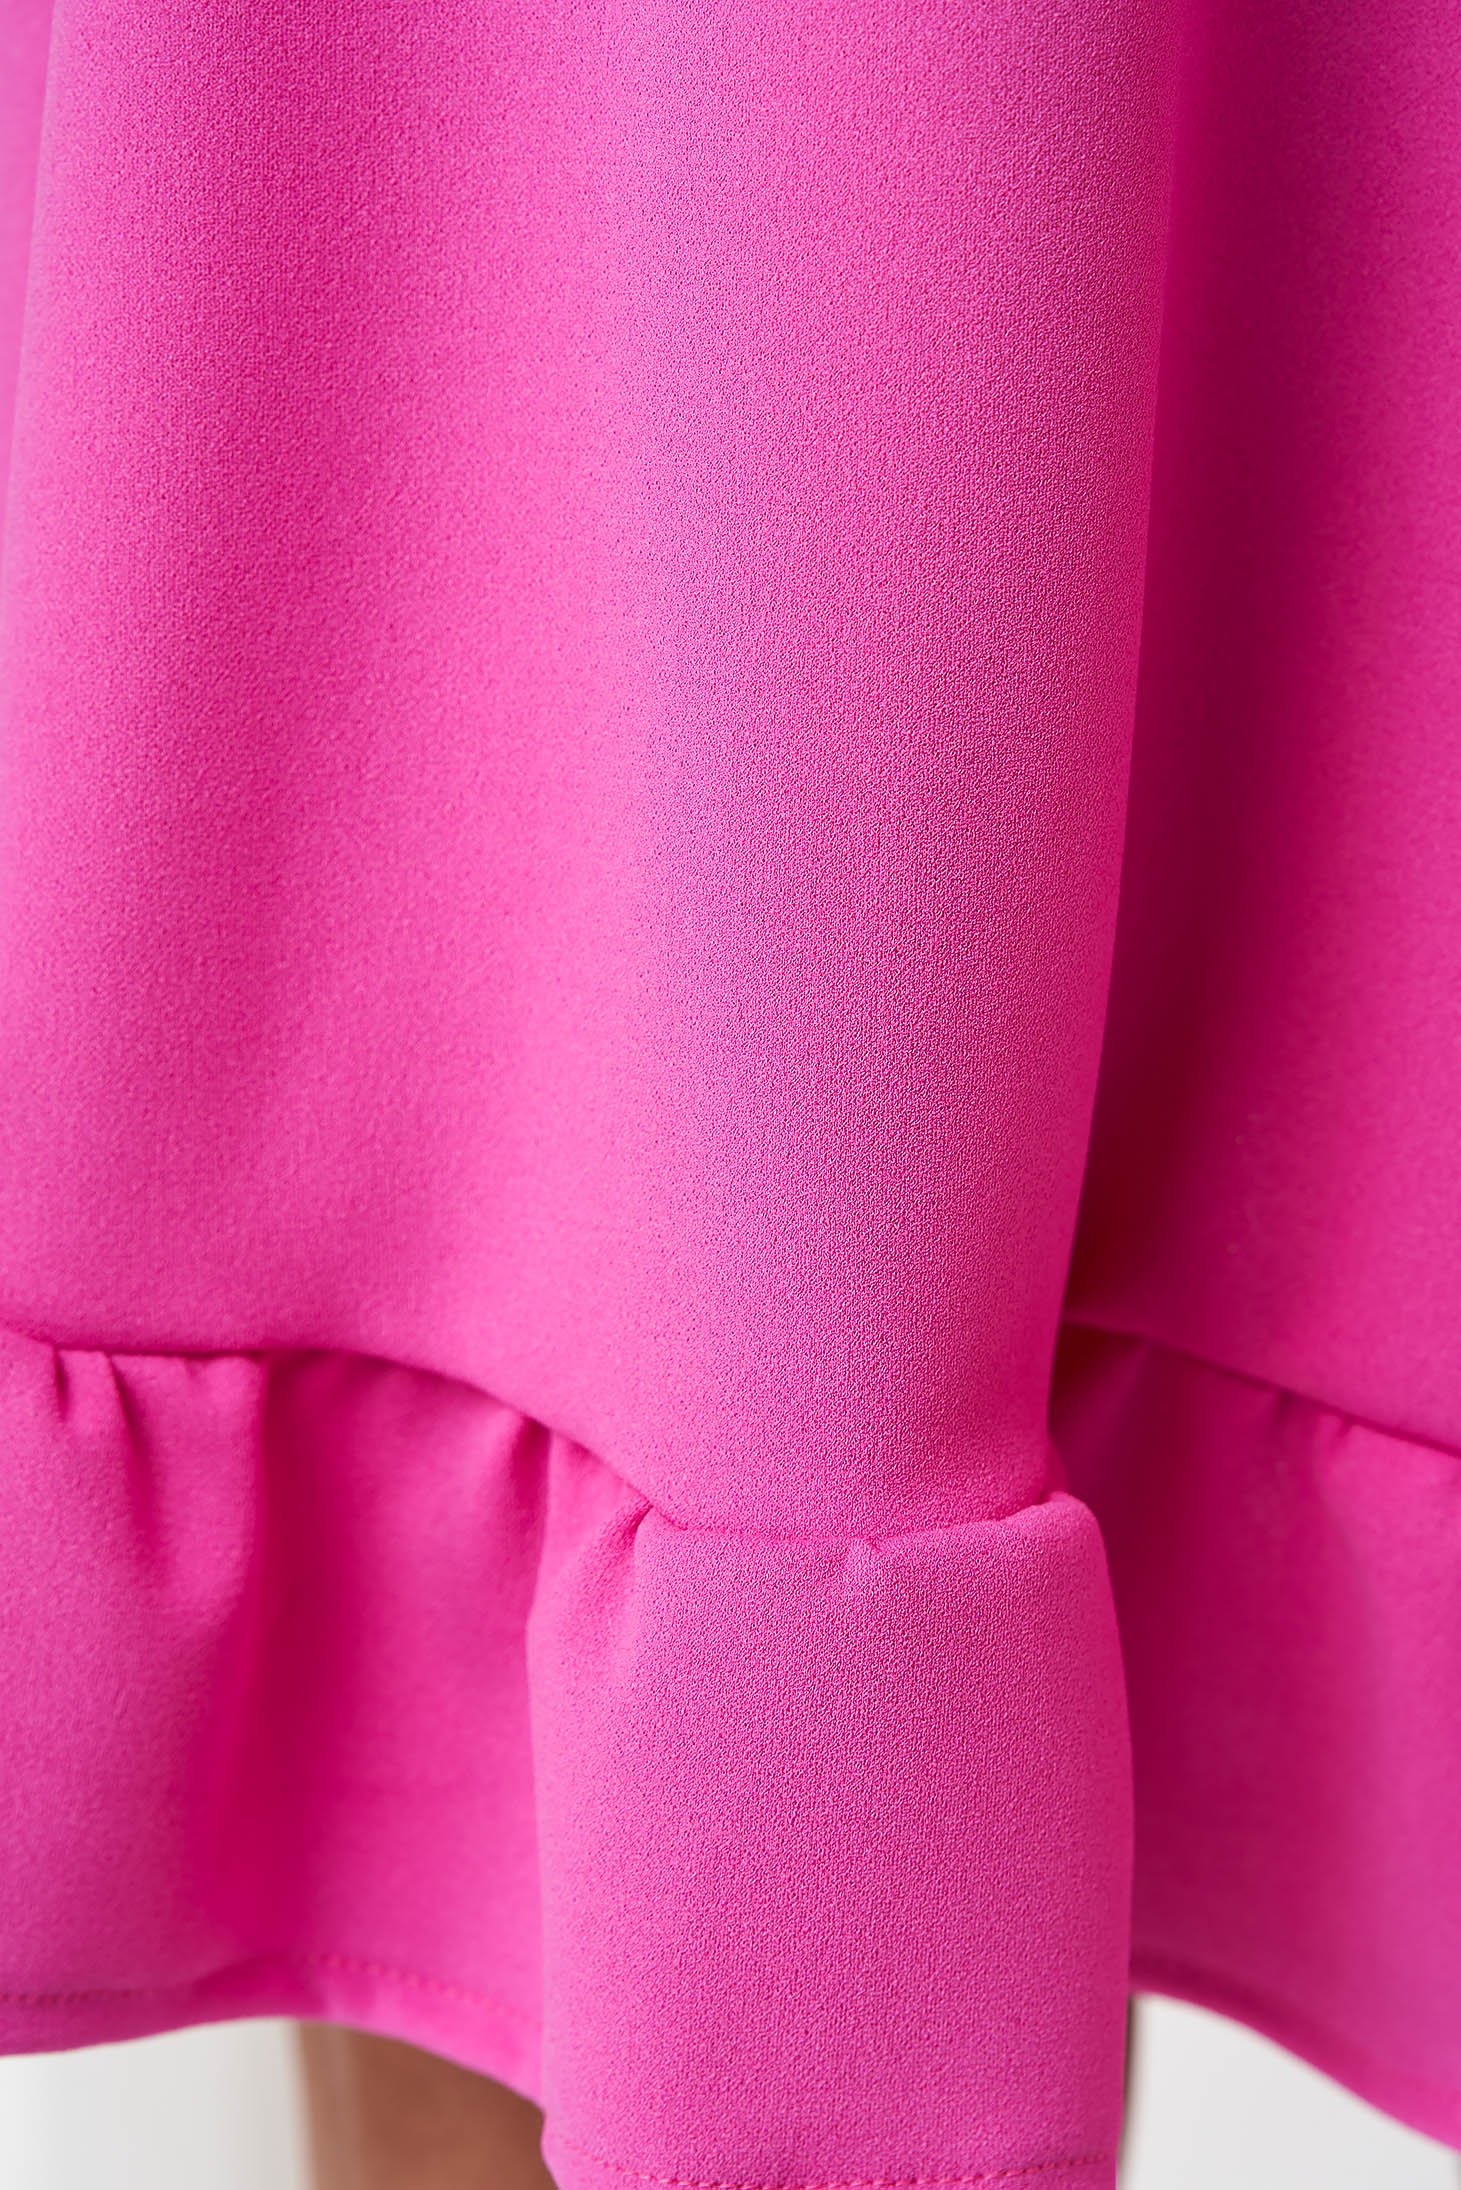 Fuchsia Crepe Dress in A-line with Dropped Neckline and Ruffles at the Dress Base - StarShinerS 4 - StarShinerS.com